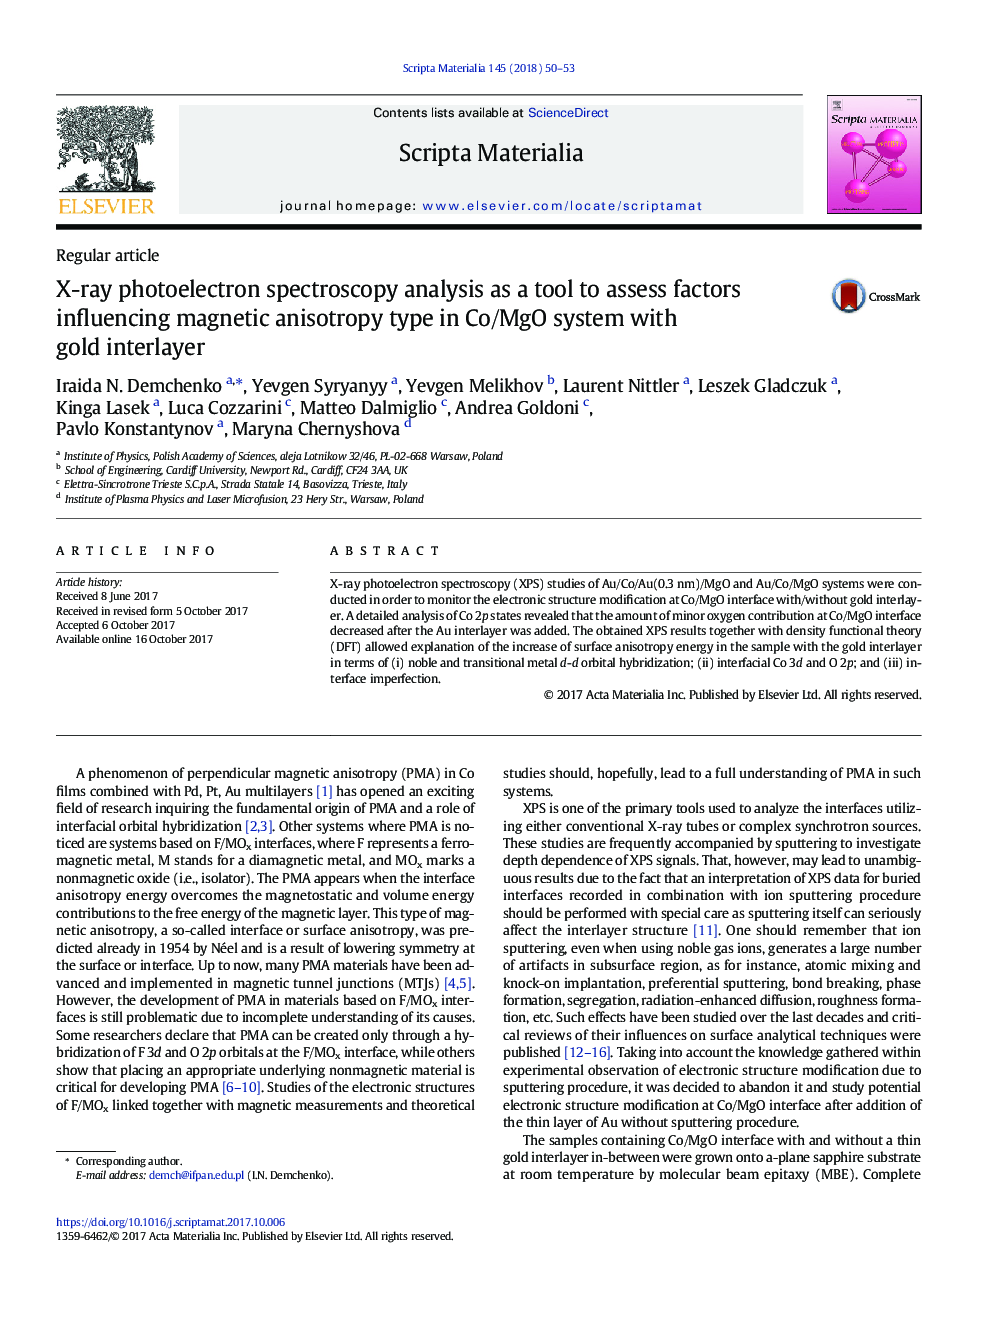 X-ray photoelectron spectroscopy analysis as a tool to assess factors influencing magnetic anisotropy type in Co/MgO system with gold interlayer